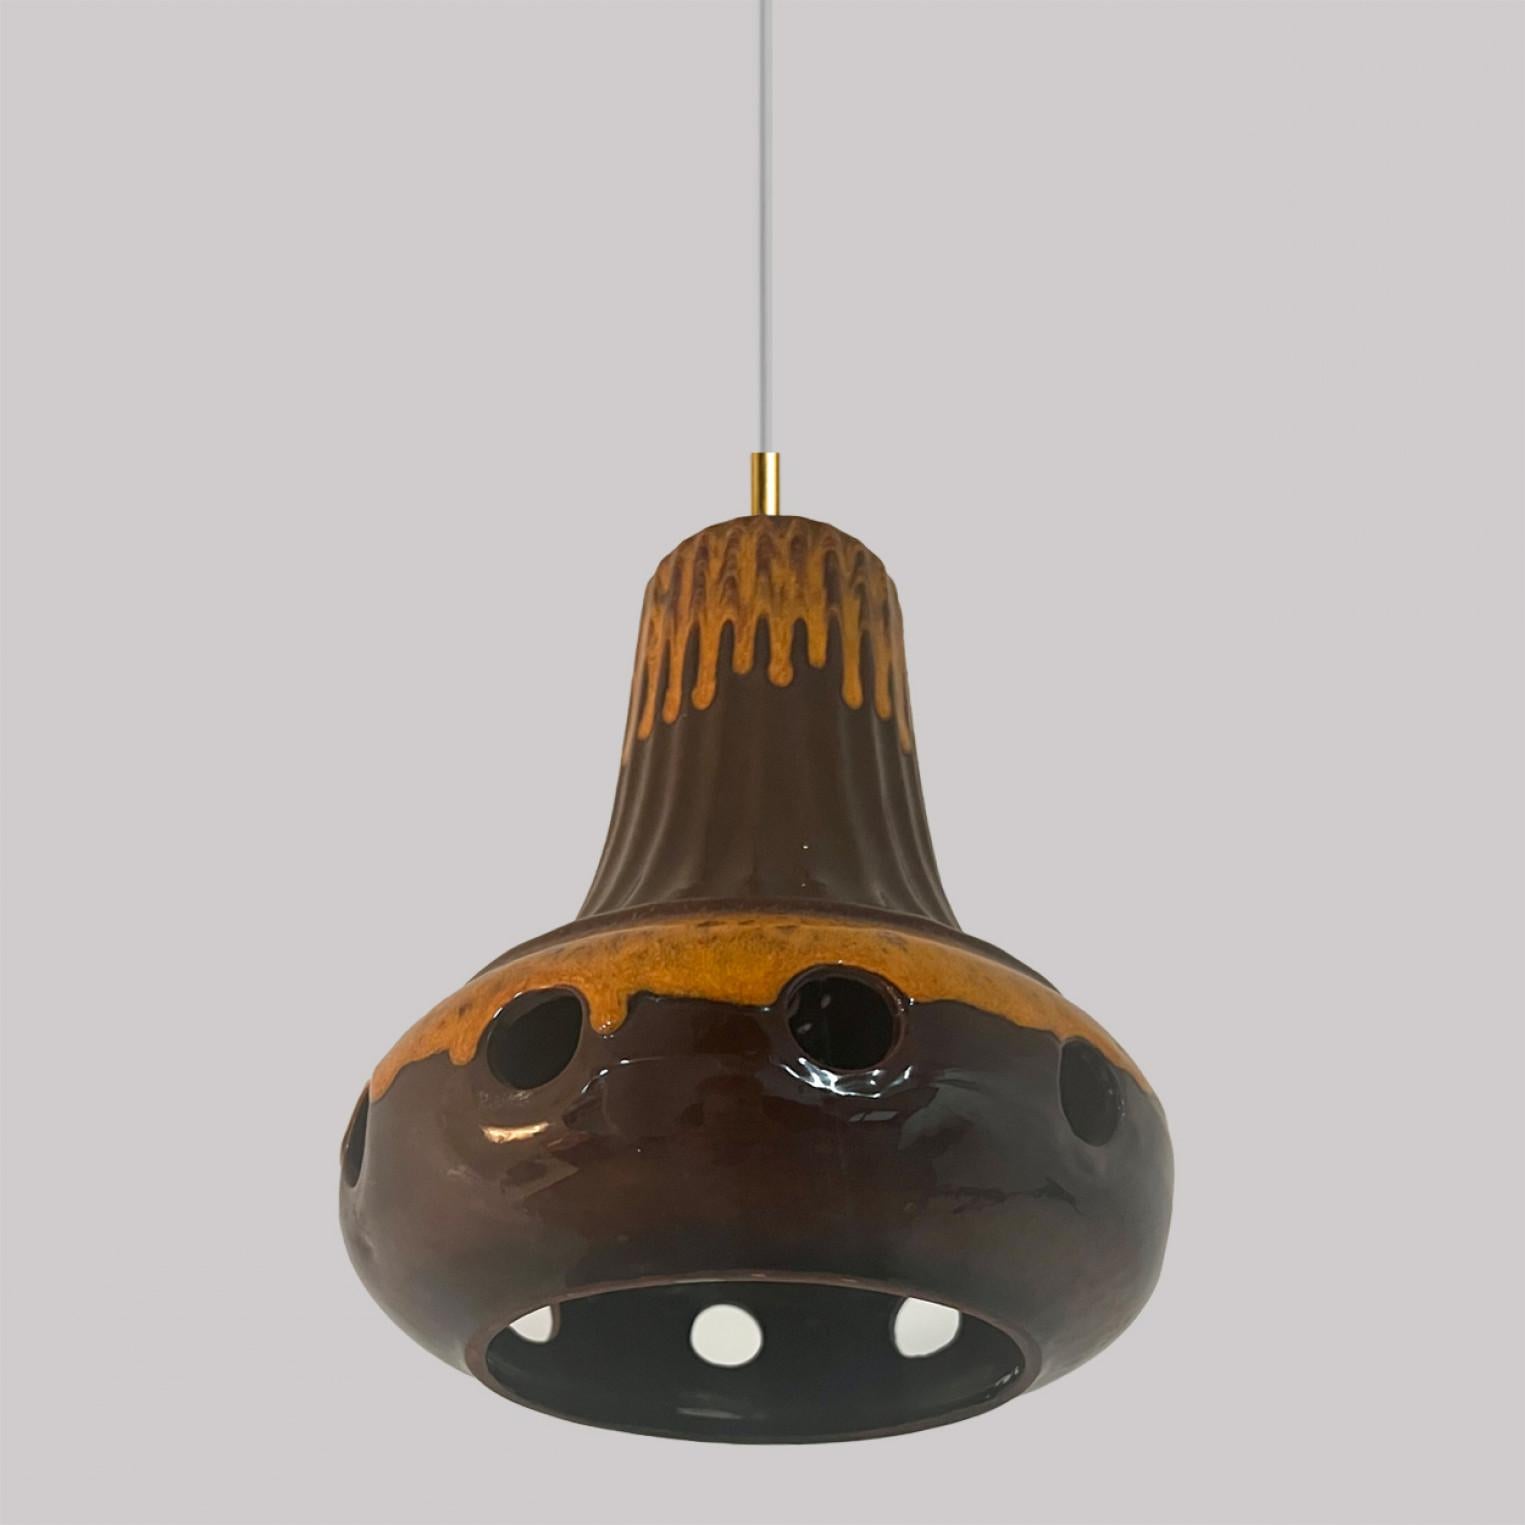 Set of Mixed Brown Glazed Ceramic Pendant Lights, Germany, 1970s For Sale 1